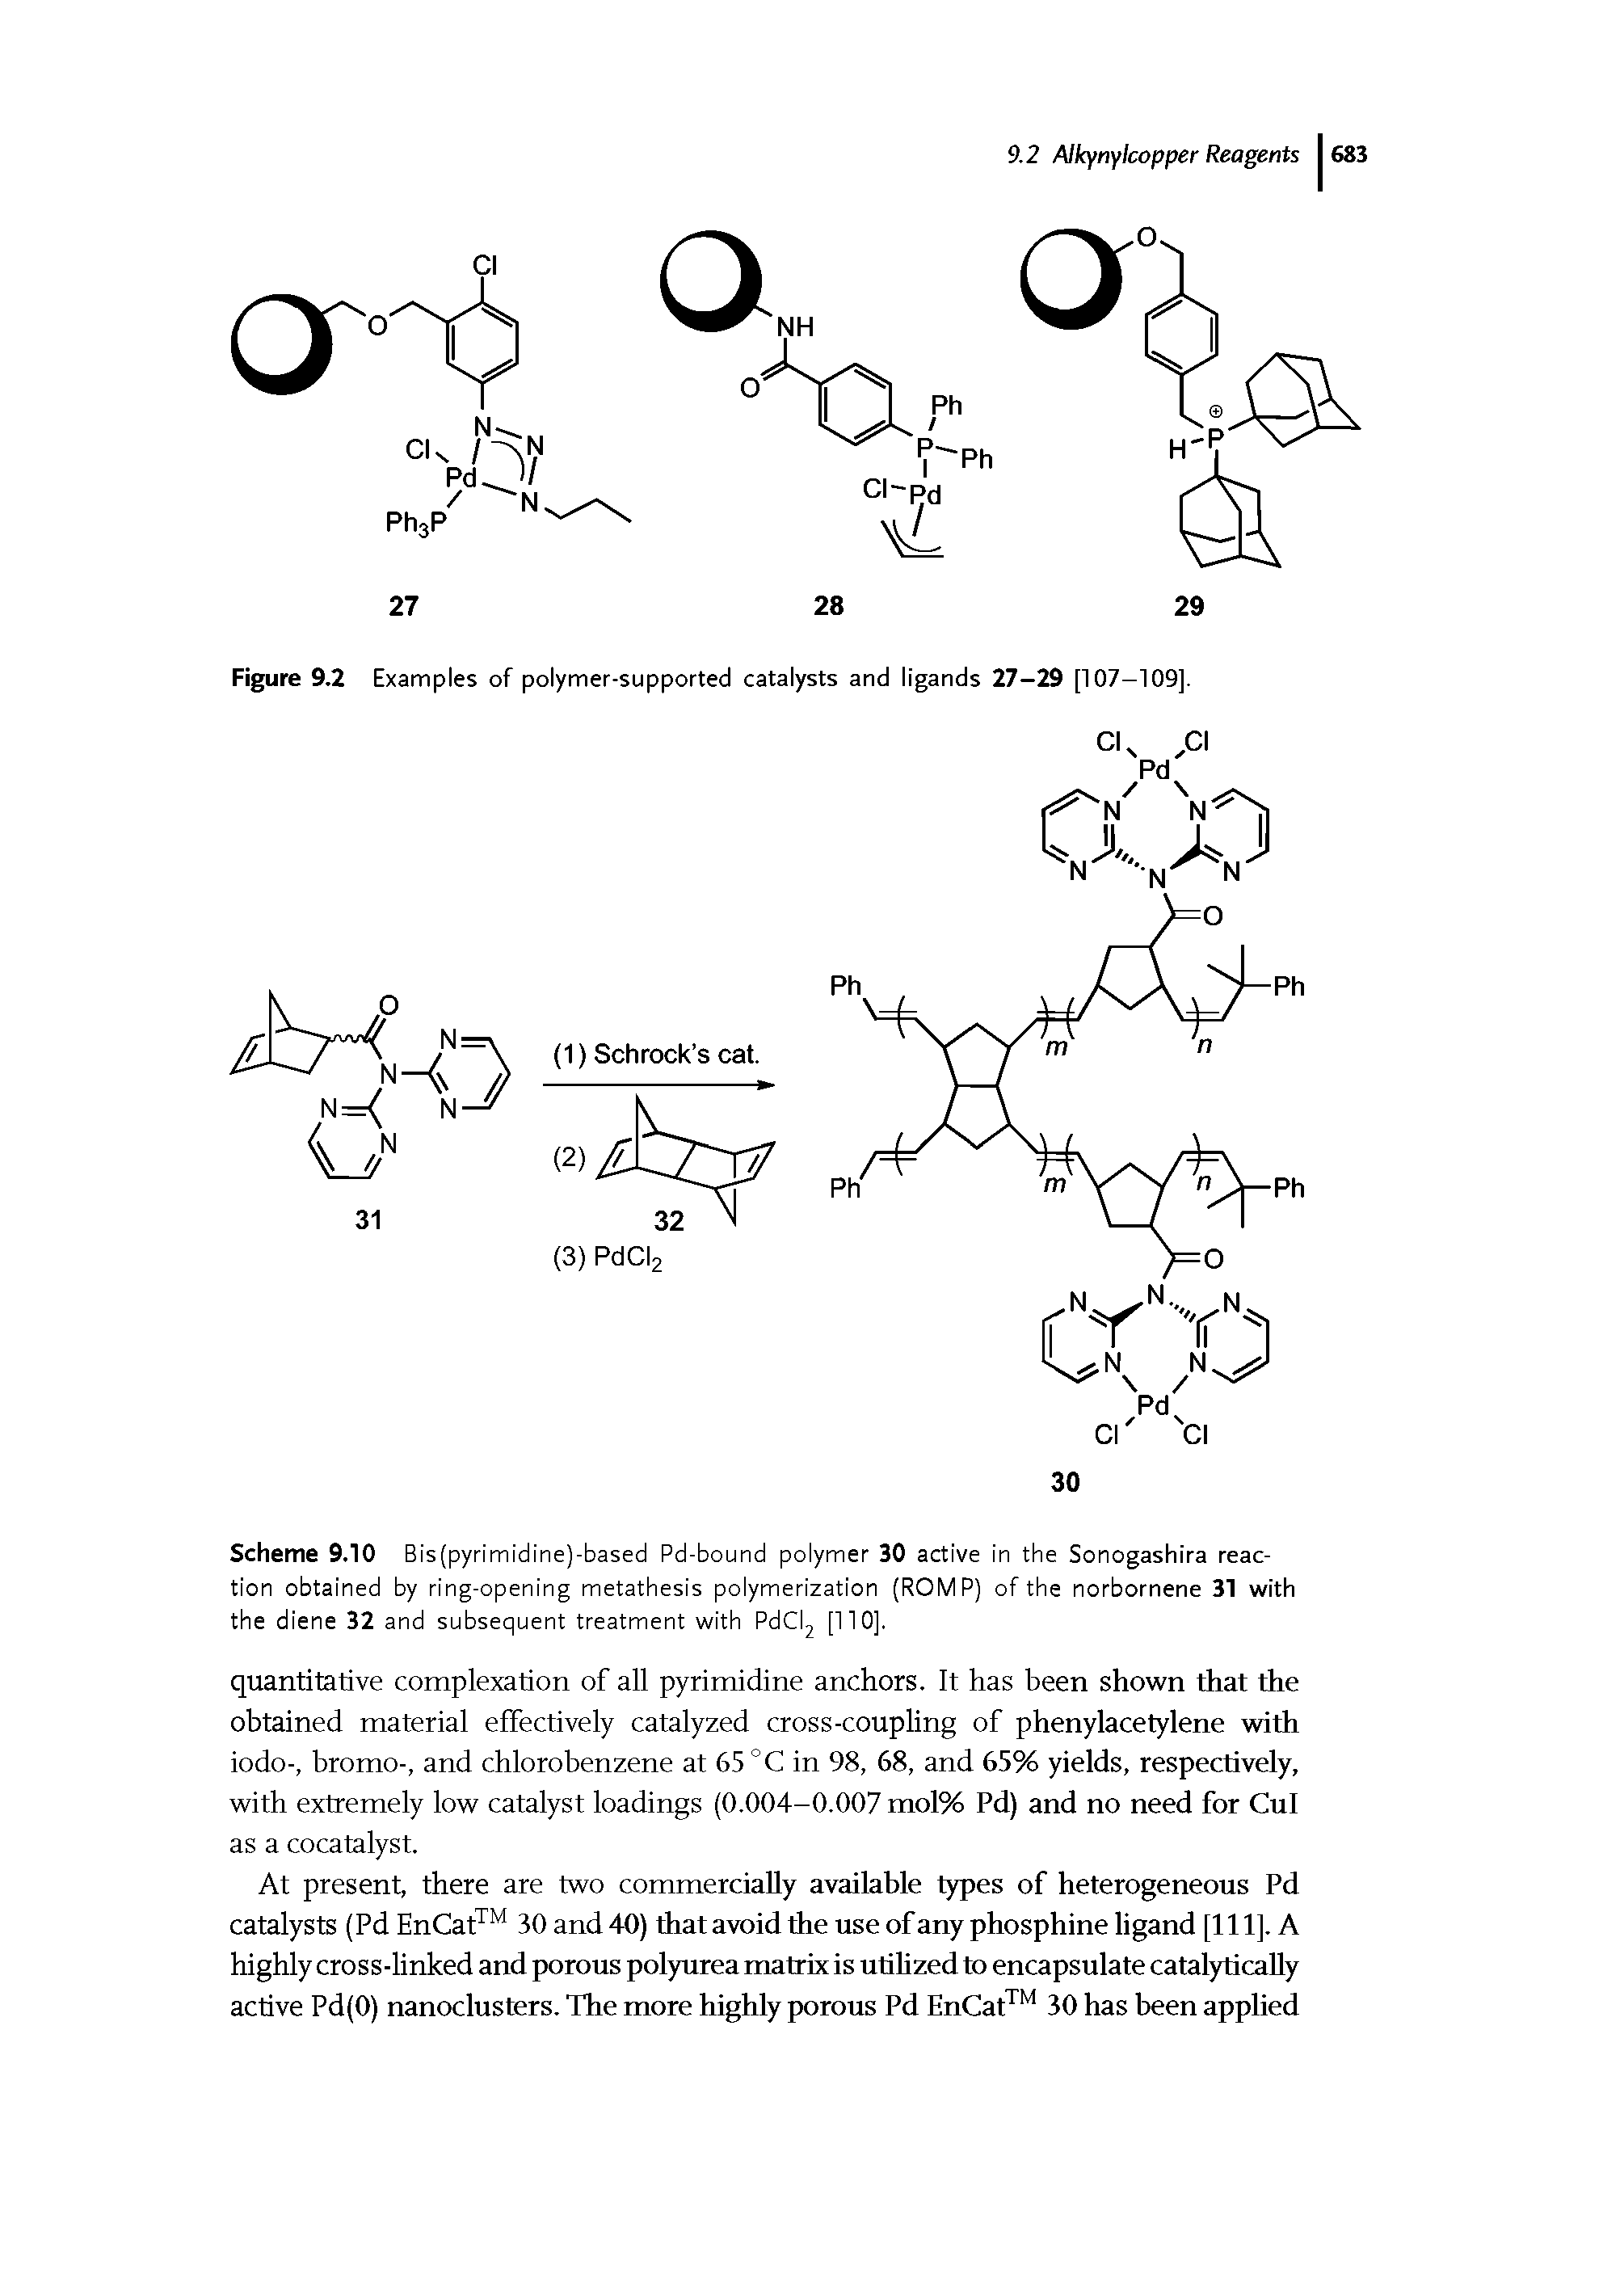 Scheme 9.10 Bis(pyrimidine)-based Pd-bound polymer 30 active in the Sonogashira reaction obtained by ring-opening metathesis polymerization (ROMP) of the norbornene 31 with the diene 32 and subsequent treatment with PdClj [110].